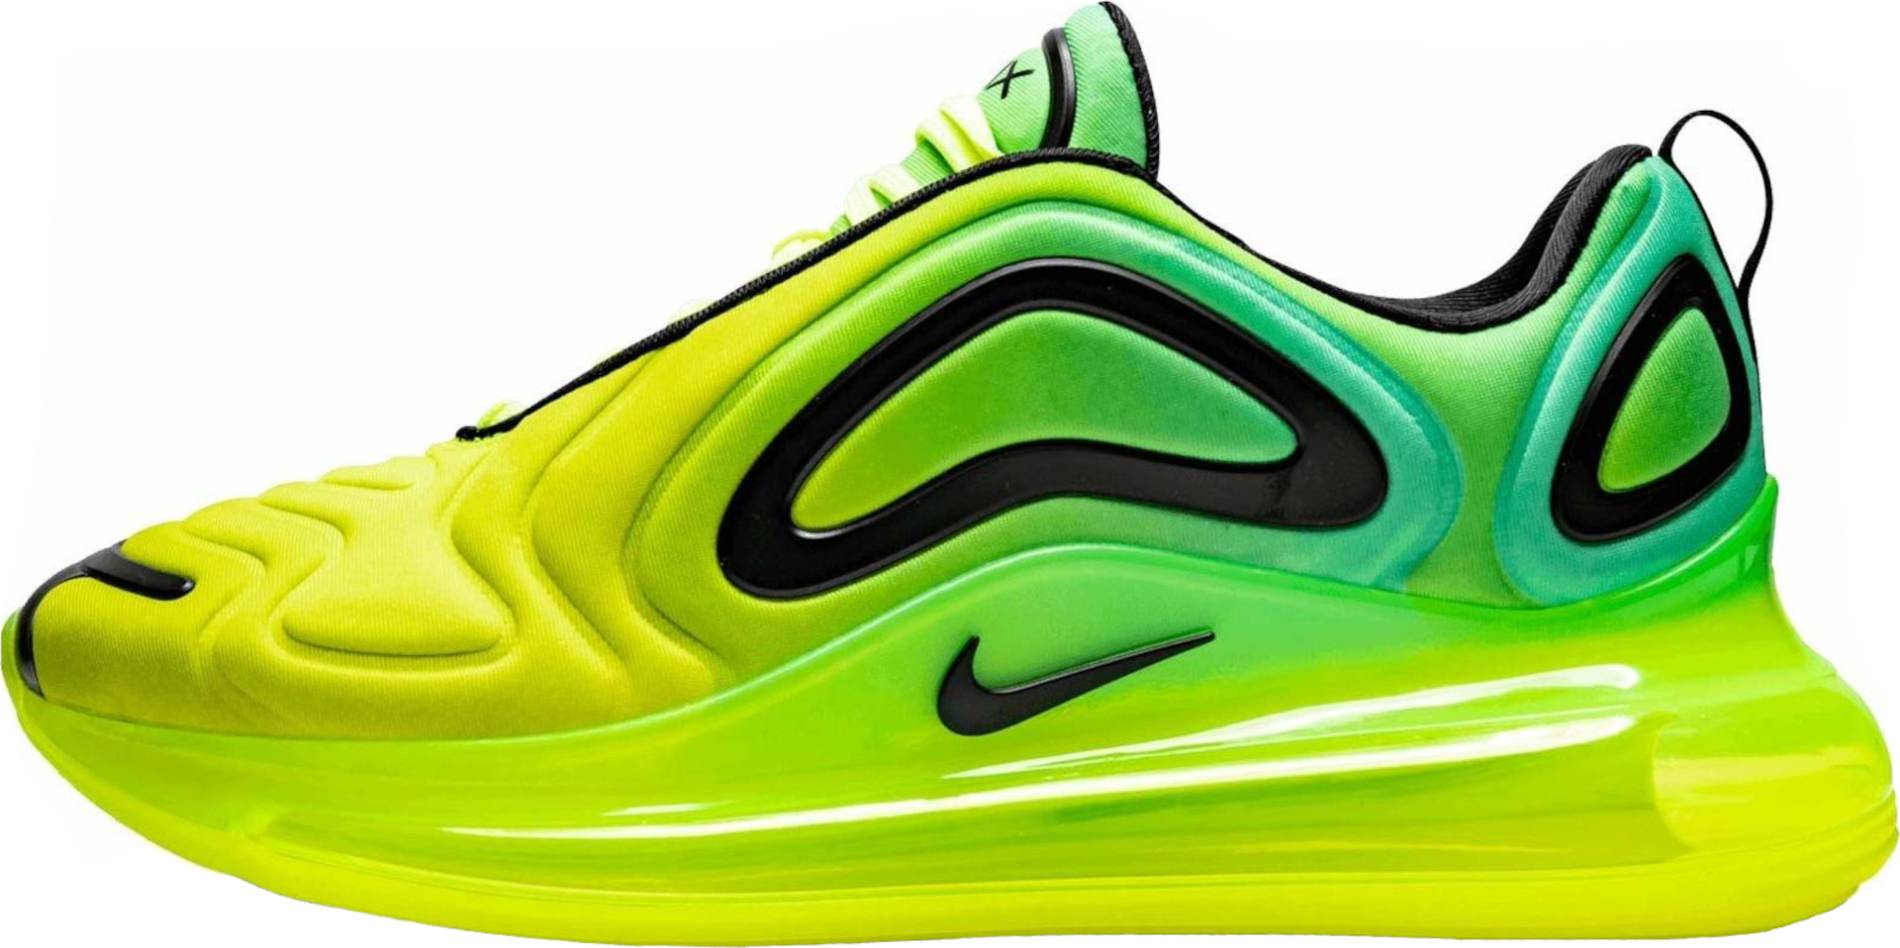 Save 33% on Green Nike Sneakers (74 